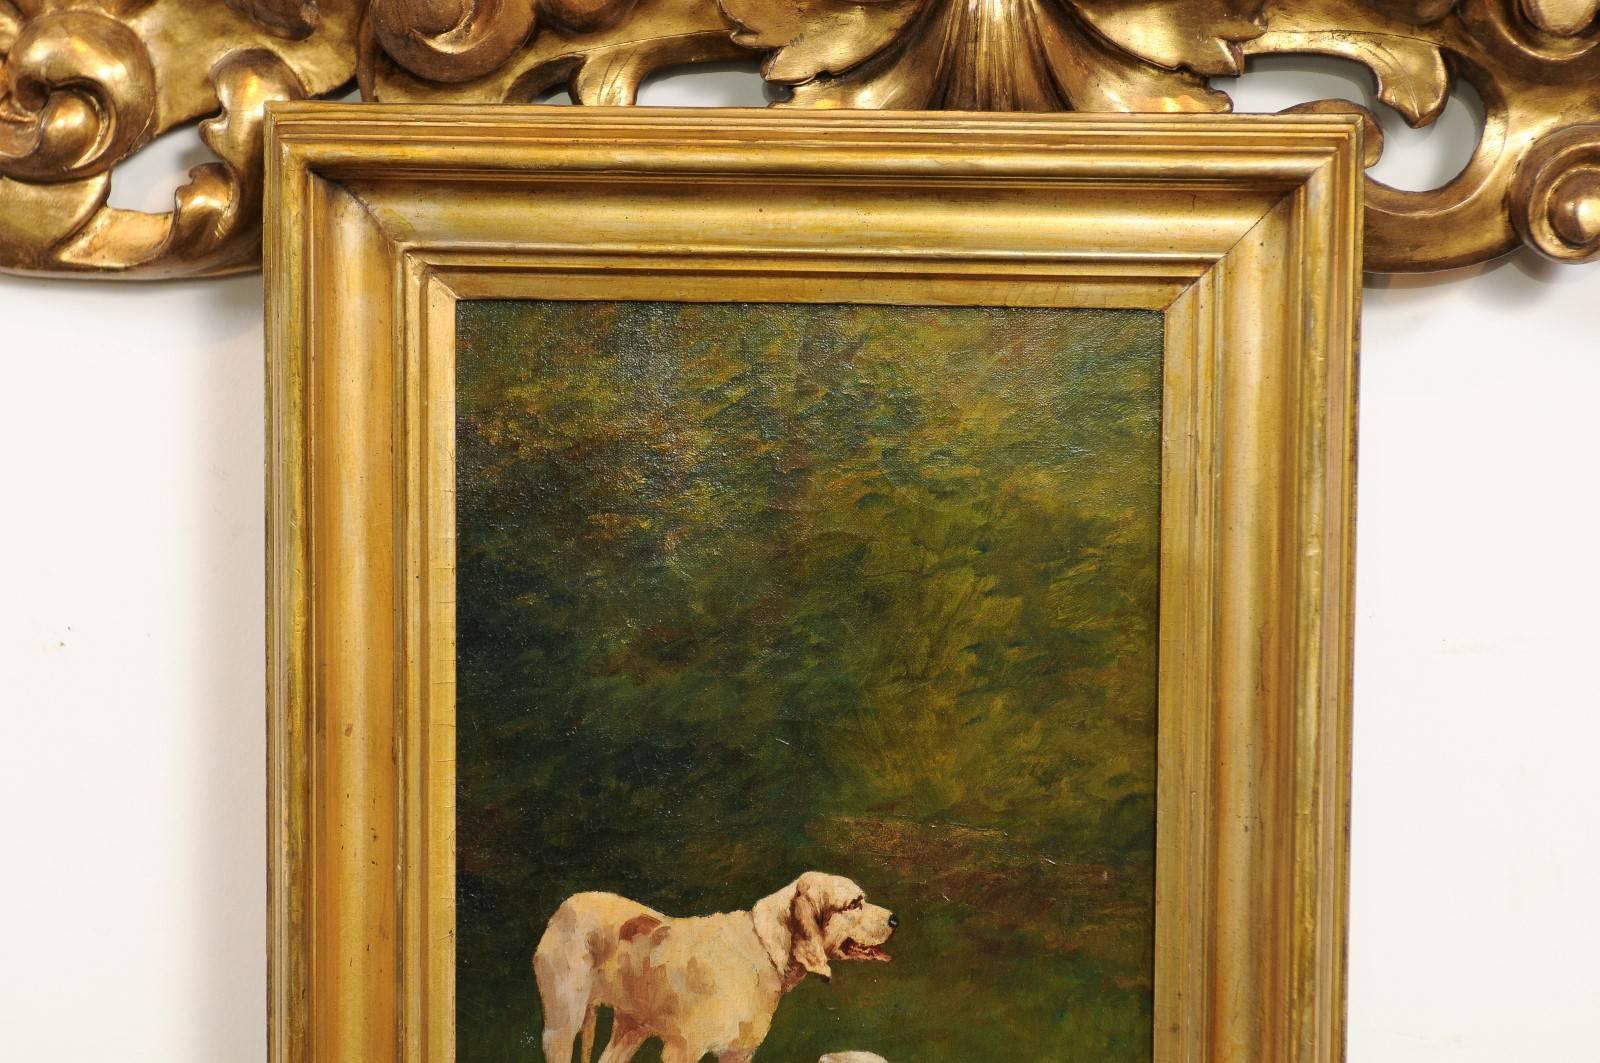 20th Century French Dog Oil Painting on Canvas circa 1900 in Antique Giltwood Frame